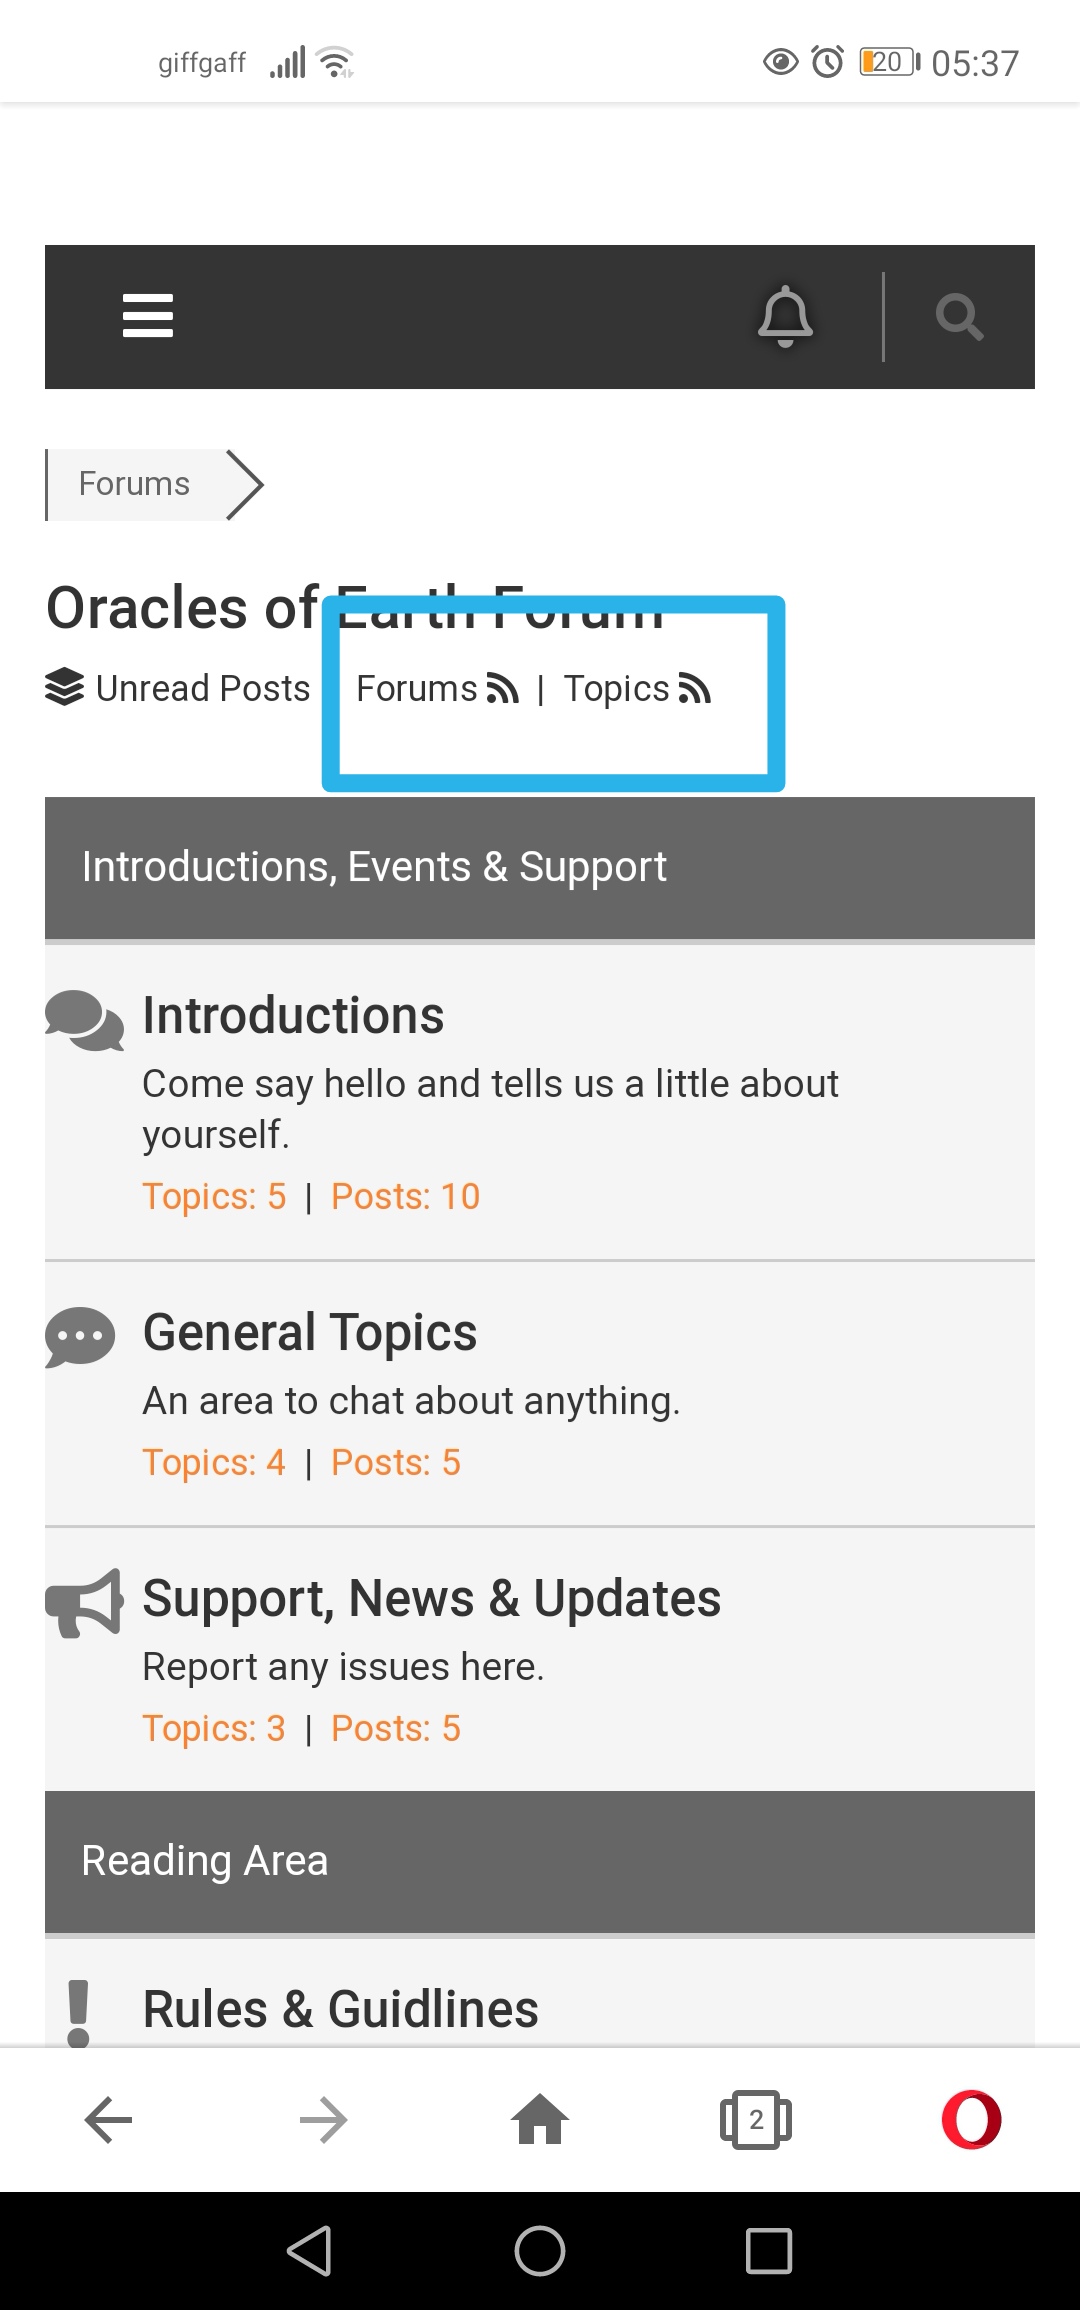 How To Change “forum And Topic” Links Showing Next To Unread Posts Link